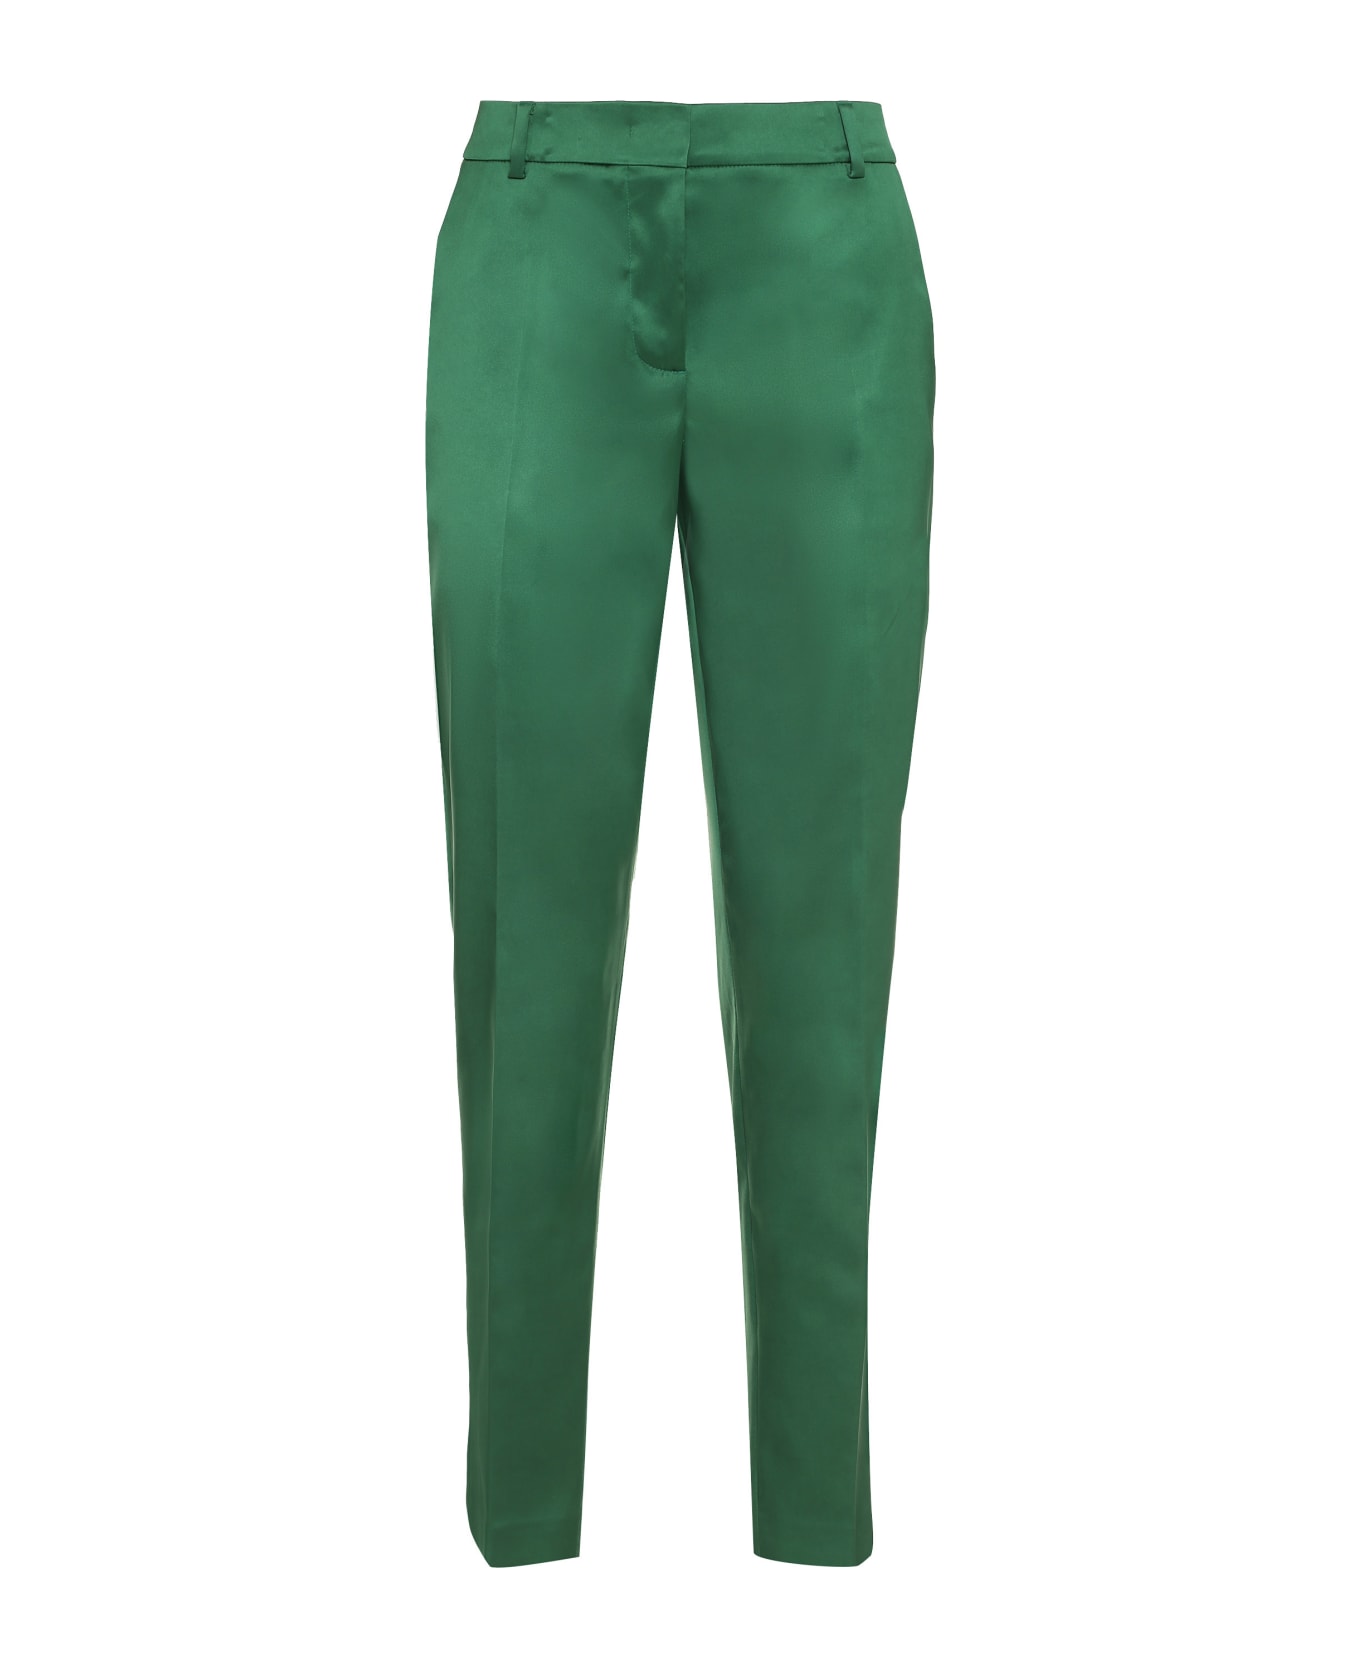 Boutique Moschino Satin Trousers - green